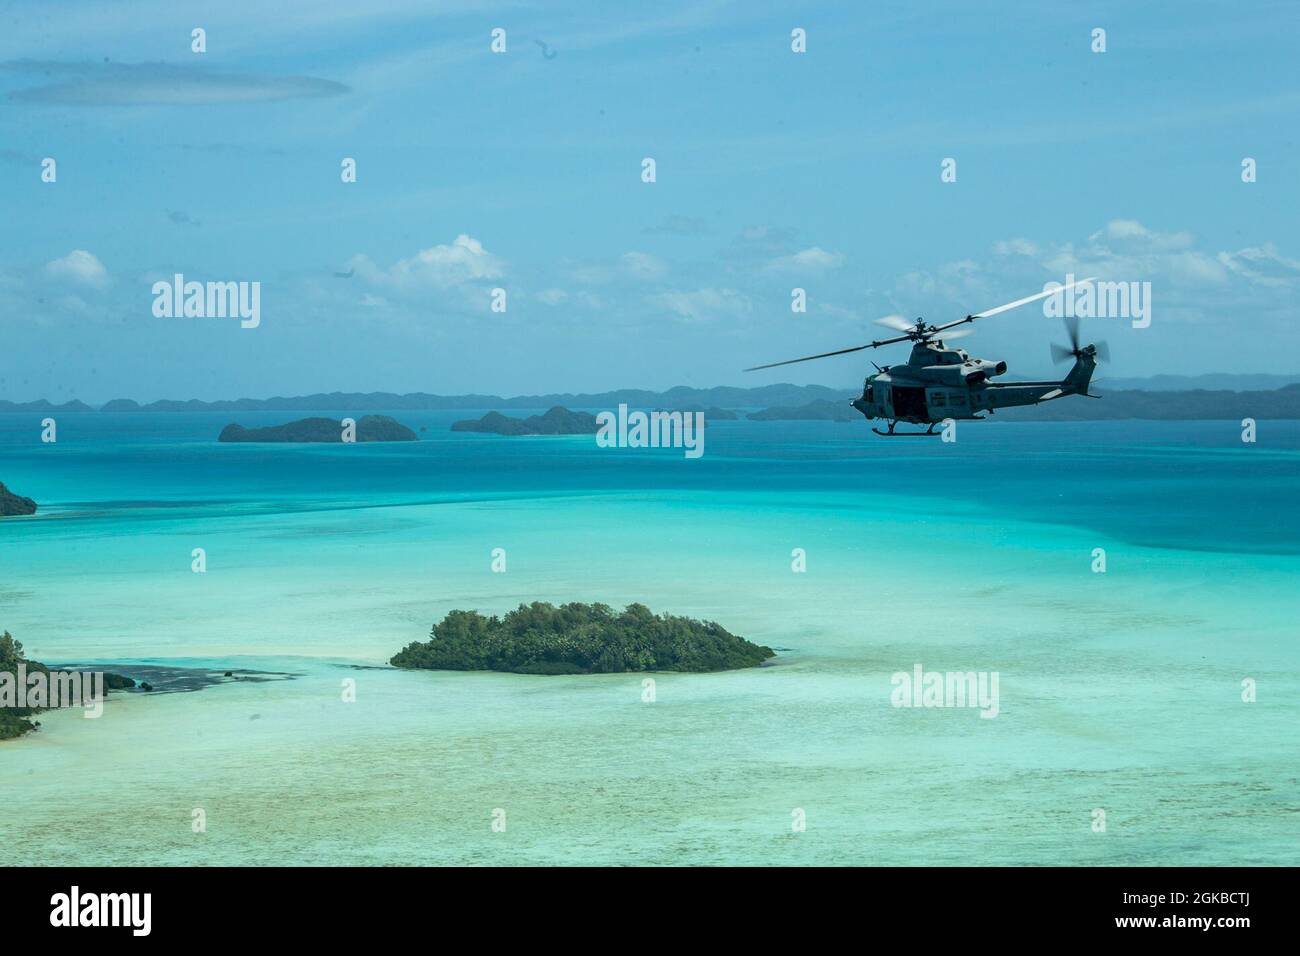 A U.S. Marine Corps UH-1Y Huey with Marine Medium Tiltrotor Squadron 262 (Reinforced), 31st Marine Expeditionary Unit (MEU), flies above Palau after departing from USS New Orleans (LPD 18) on its way to the island of Peleliu, March 3, 2021. The 31st MEU is operating aboard ships of the Amphibious Squadron 11 in the 7th fleet area of operations to enhance interoperability with allies and partners and serve as a ready response force to defend peace and stability in the Indo-Pacific region. Stock Photo